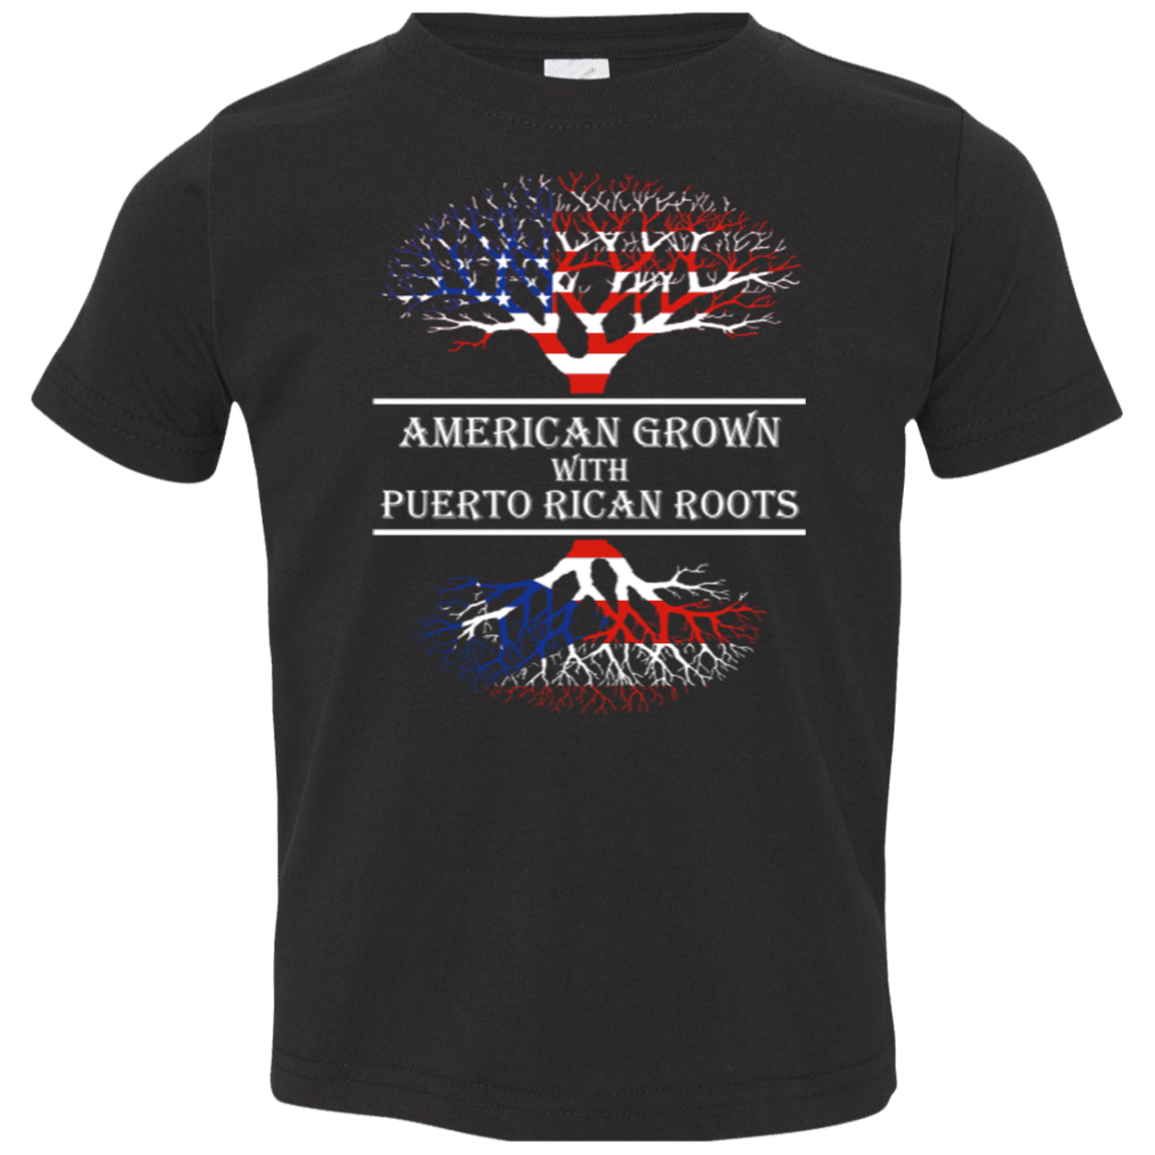 Toddler Tee - American With Puerto Rican Roots - Toddler Tee